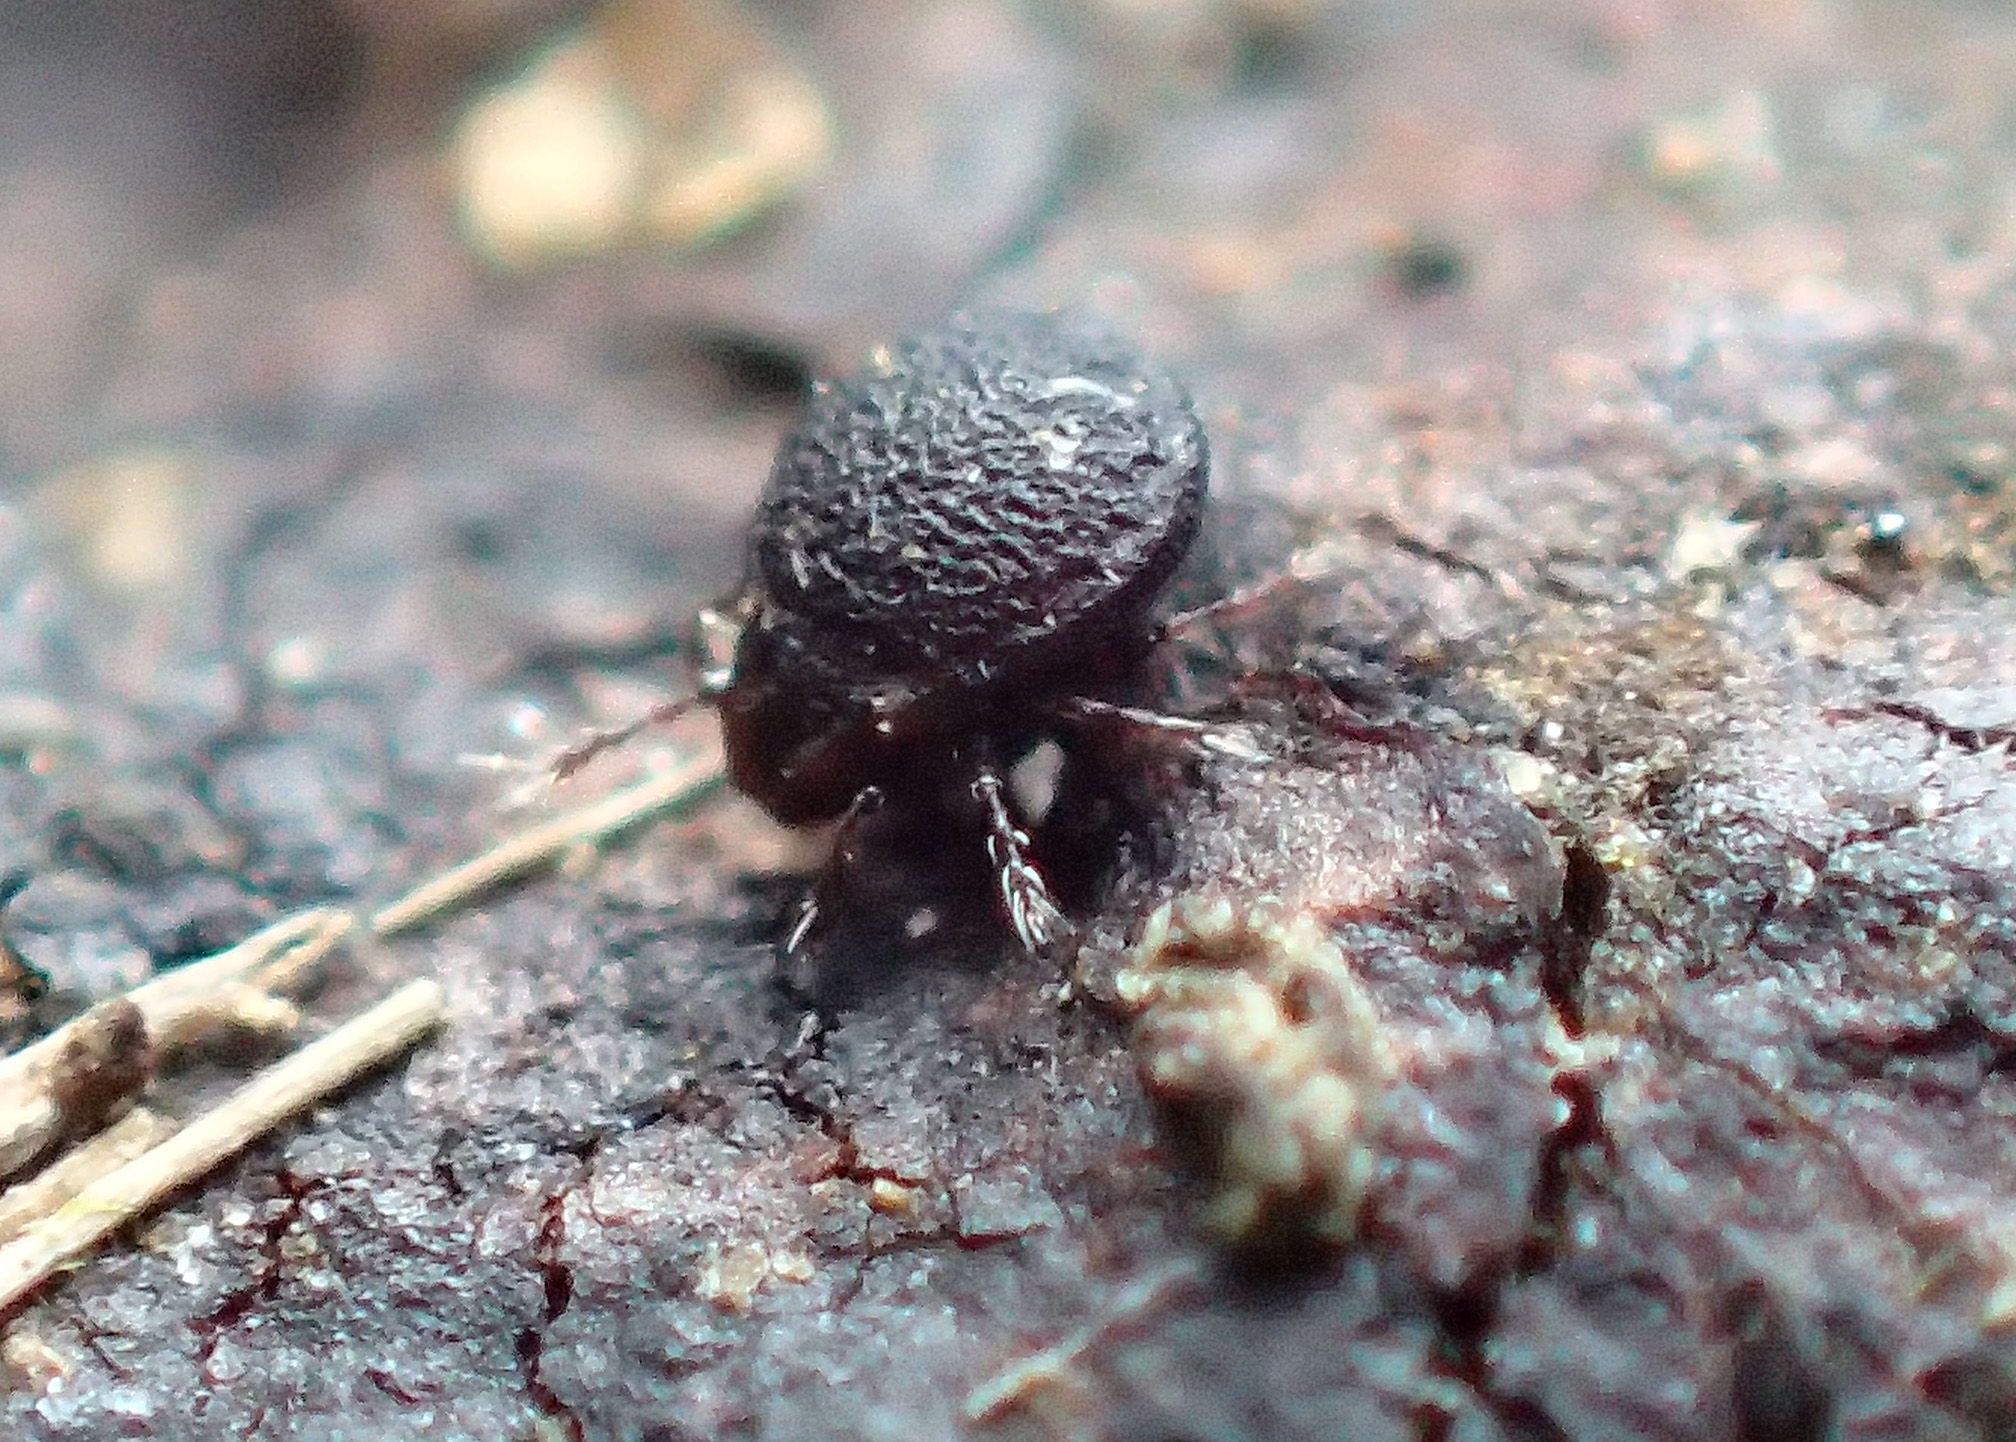 A soil mite. The mite is a very dark color, almost black, and has eight legs. The body is round with a very rough surface covered in irregular ridges. It is walking across soil. 